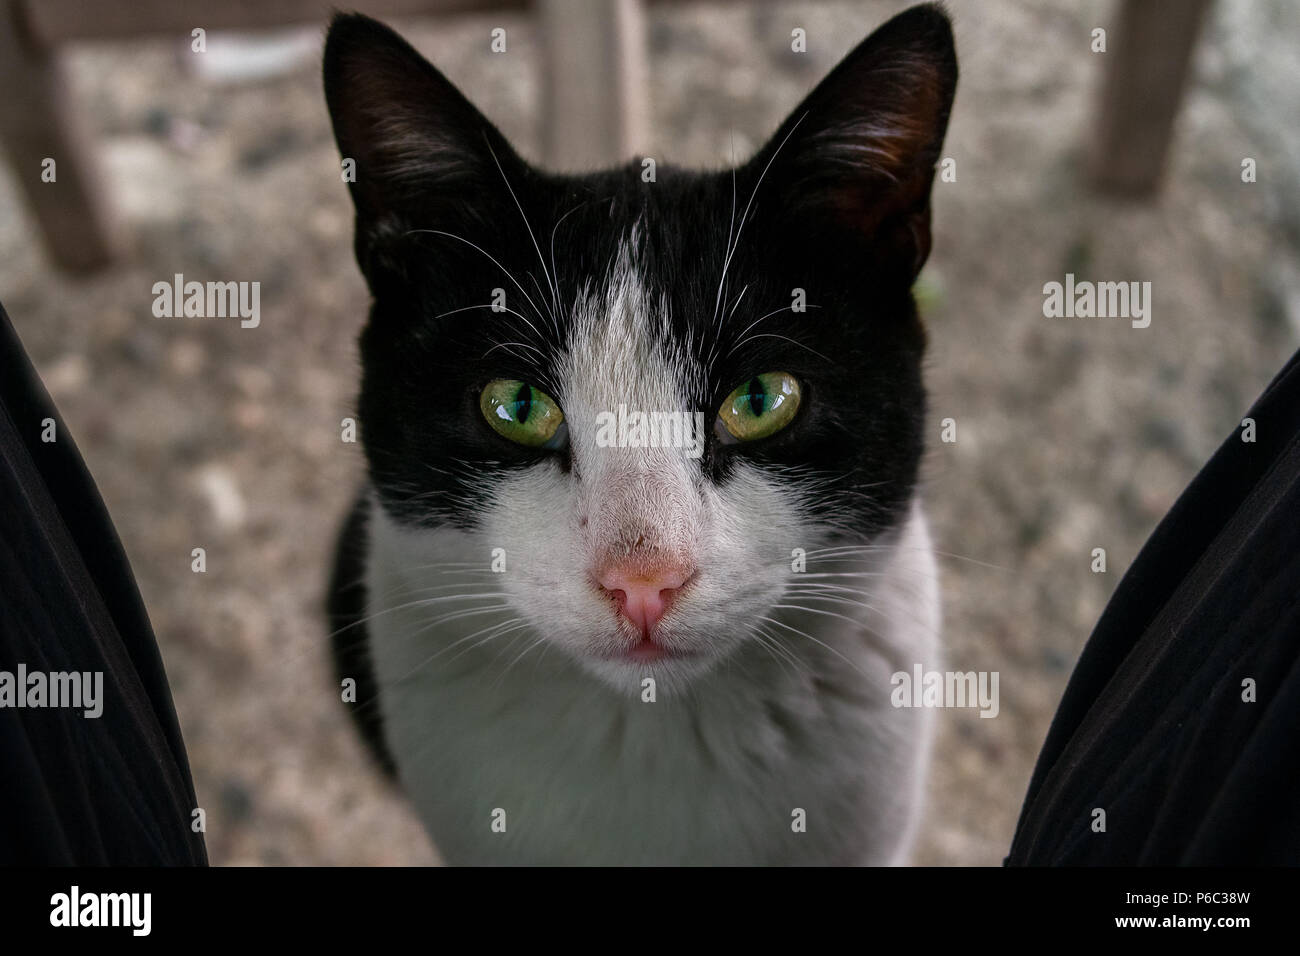 A detailed close up of an adult black and white cat with green eyes looking up directly at the camera. Stock Photo